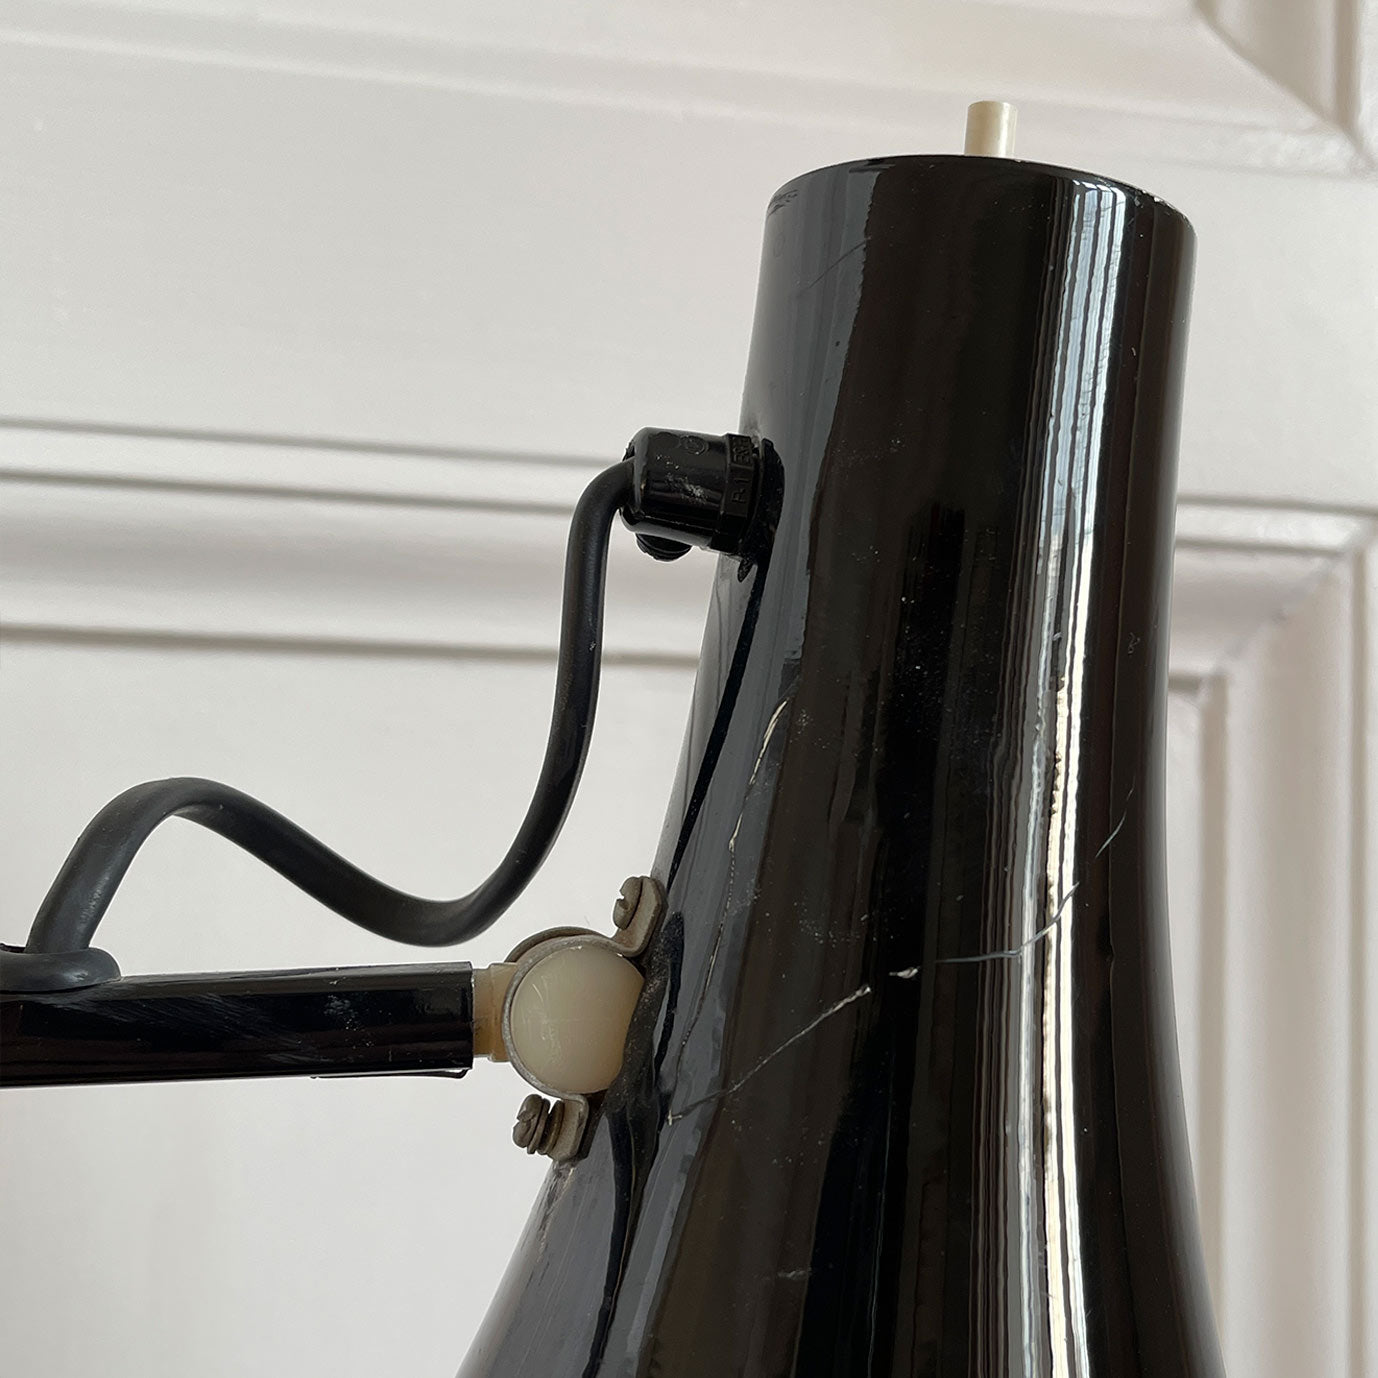 An early 1970s Herbert Terry Model 90 Adjustable Desk Lamp in black. The fluted shade has a push button switch to the top, the side arms are constructed from steel with nylon linkages. The small footprint base has a steel cover. Marked Herbert Terry to the lower arm. A smart looking lamp for the home or office. - SHOP NOW - www.intovintage.co.uk